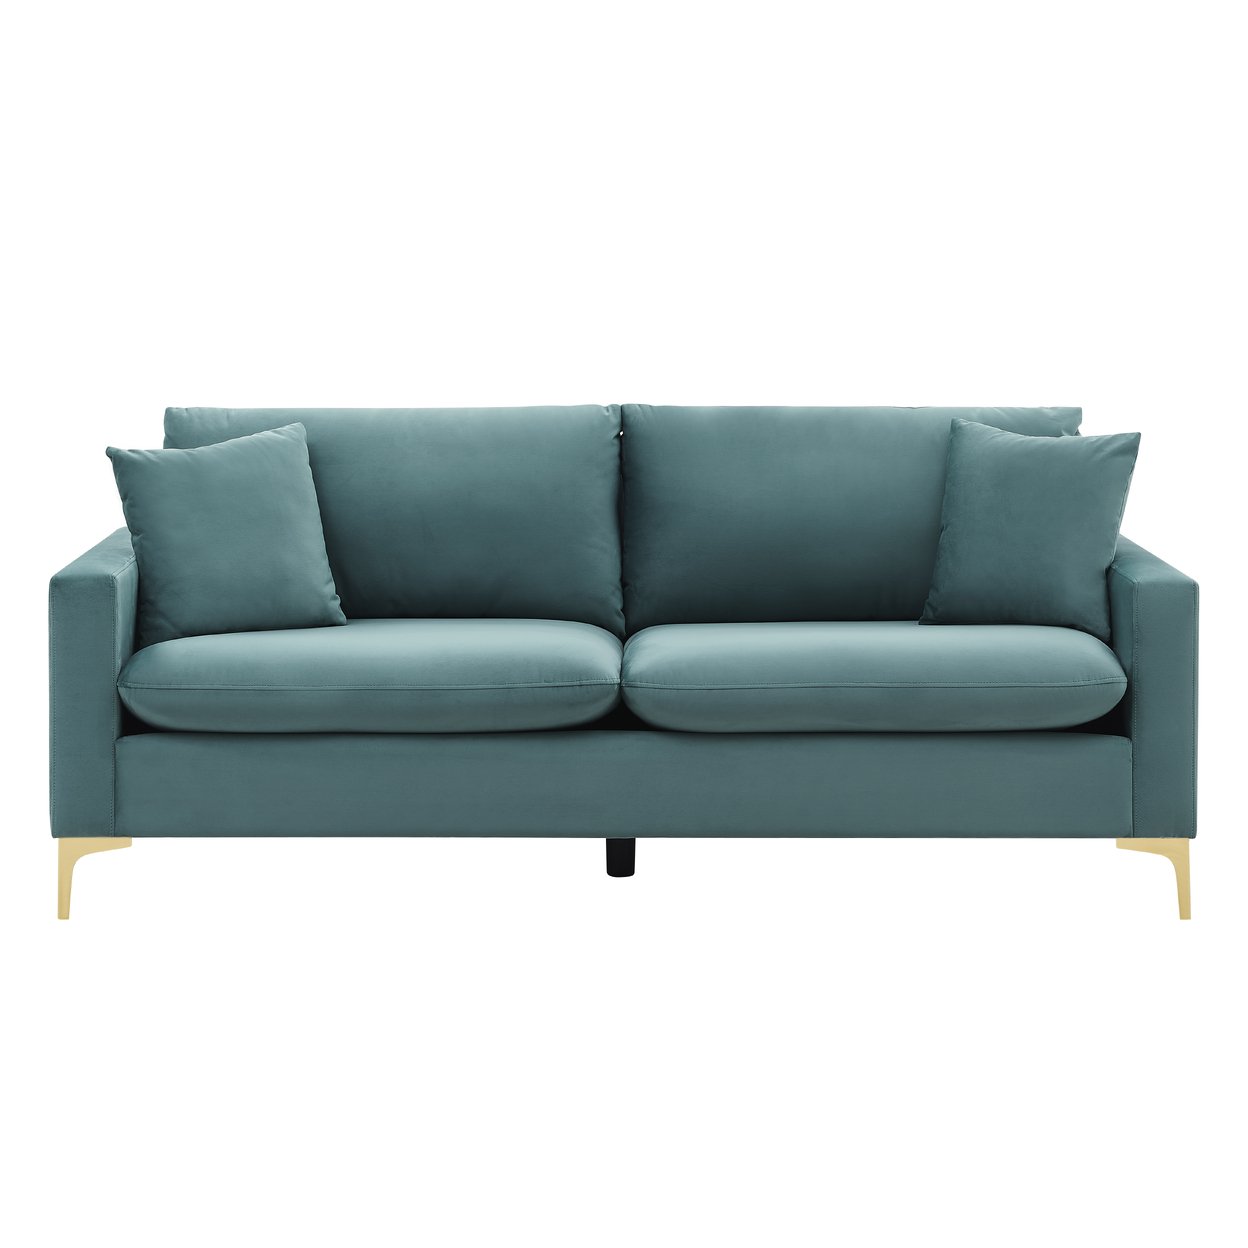 Iconic Home Roxi Sofa Velvet Upholstered Multi-Cushion Seat Gold Tone Metal Y-Legs With 2 Decorative Pillows - Green